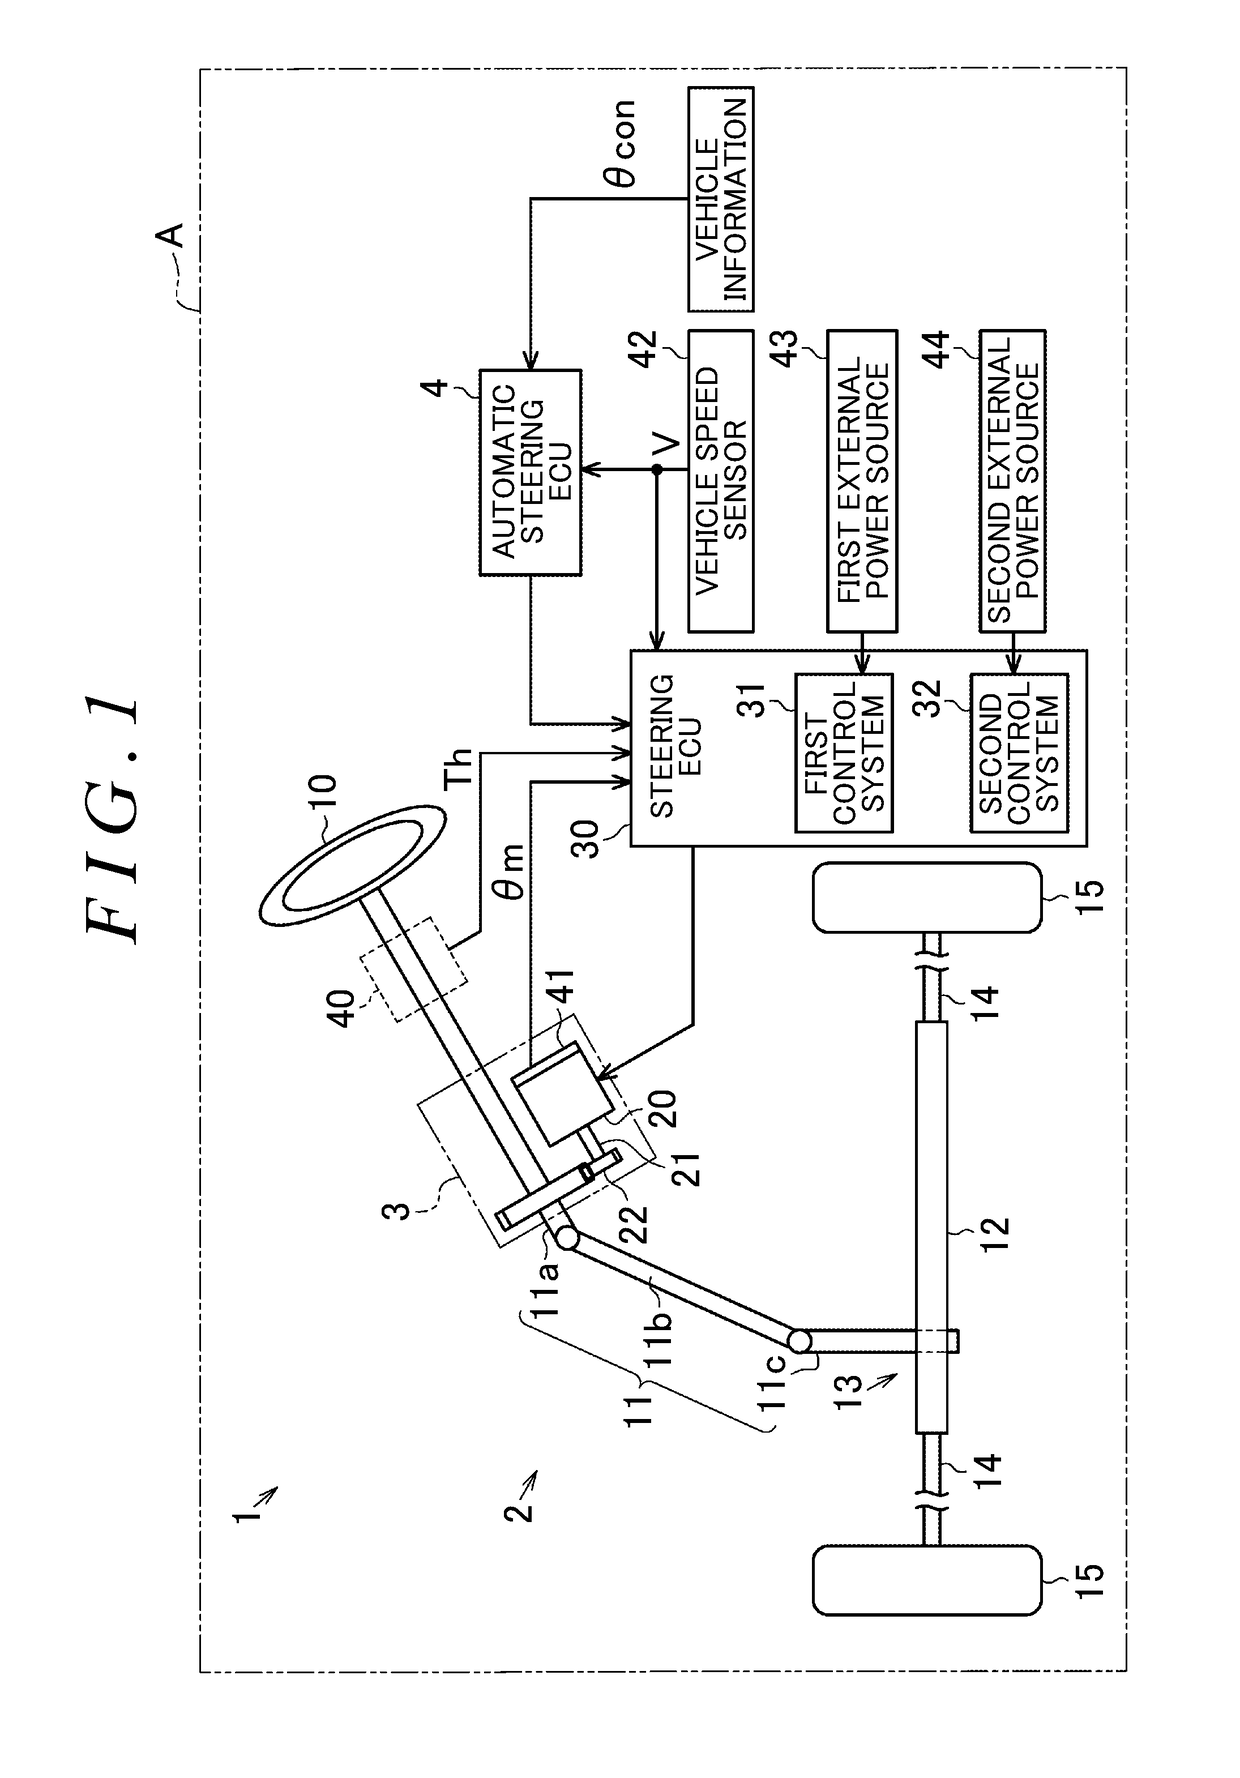 Motor control device and steering control device